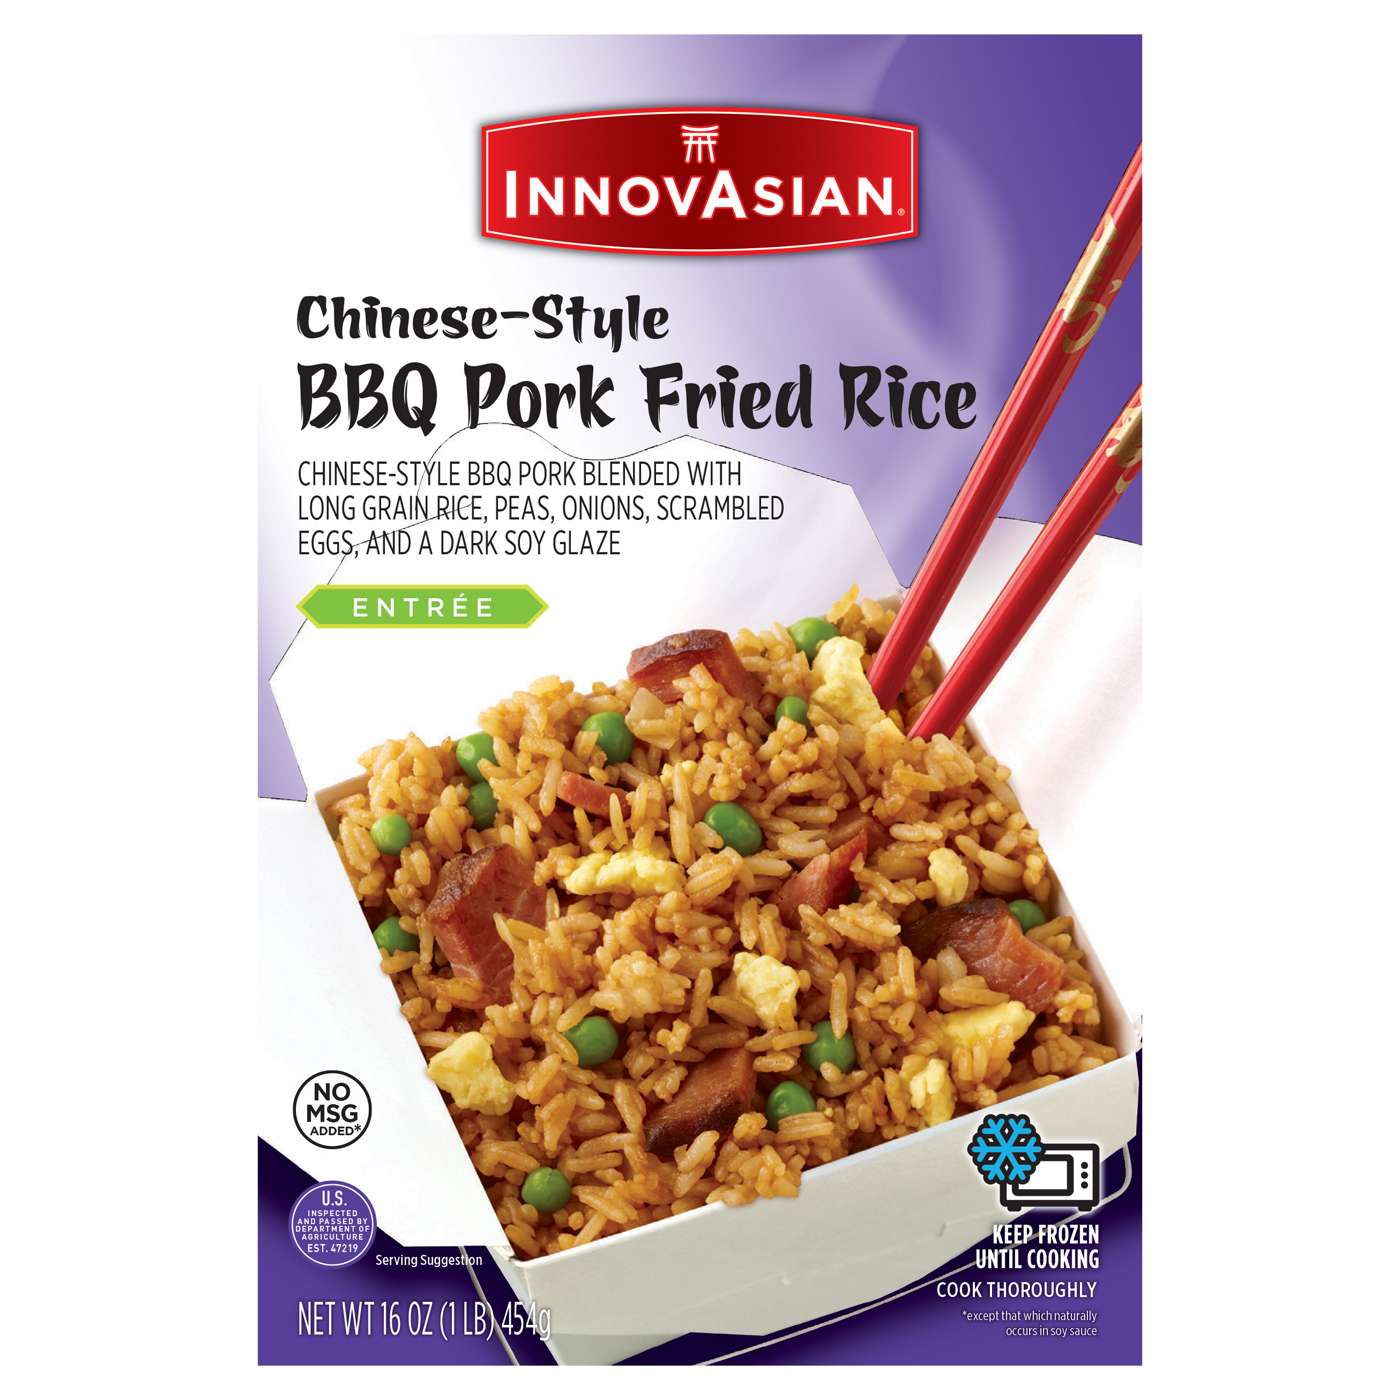 InnovAsian Frozen Chinese-Style BBQ Pork Fried Rice; image 7 of 11